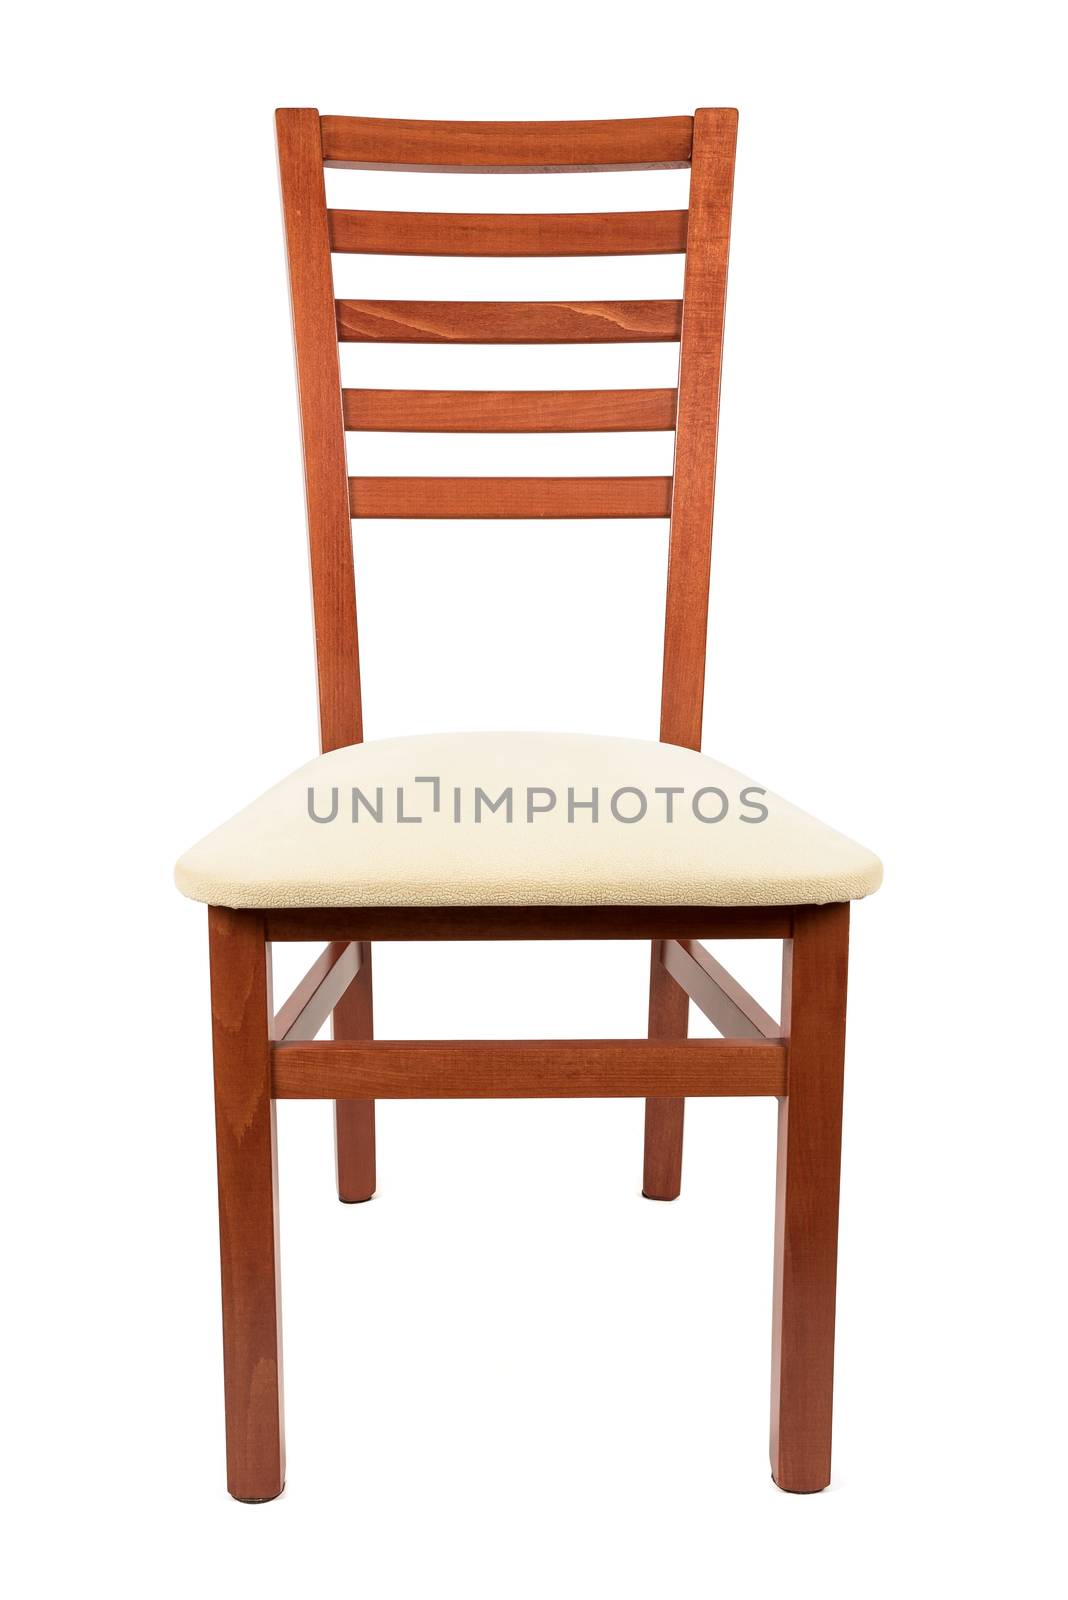 Wooden chair on white background by mkos83